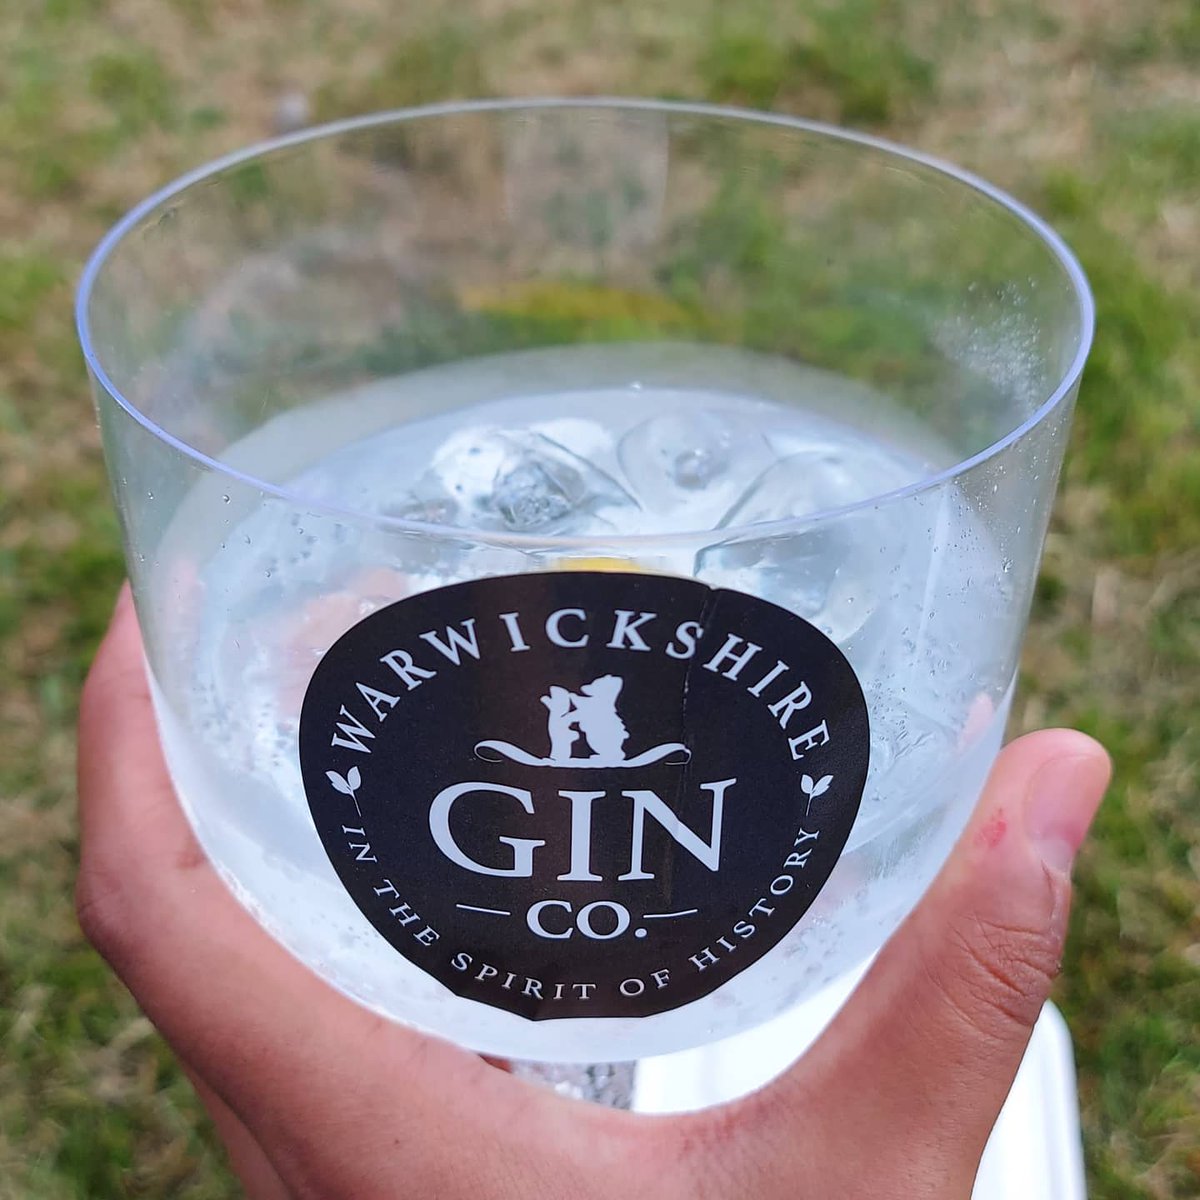 Had a WONDERFUL time at #EcoFest in #leamingtonspa today! Enjoyed a DELICIOUS #burger from @soyoi8 and a refreshing gin from @warwickshiregin 😍 #vegan #ecofriendly